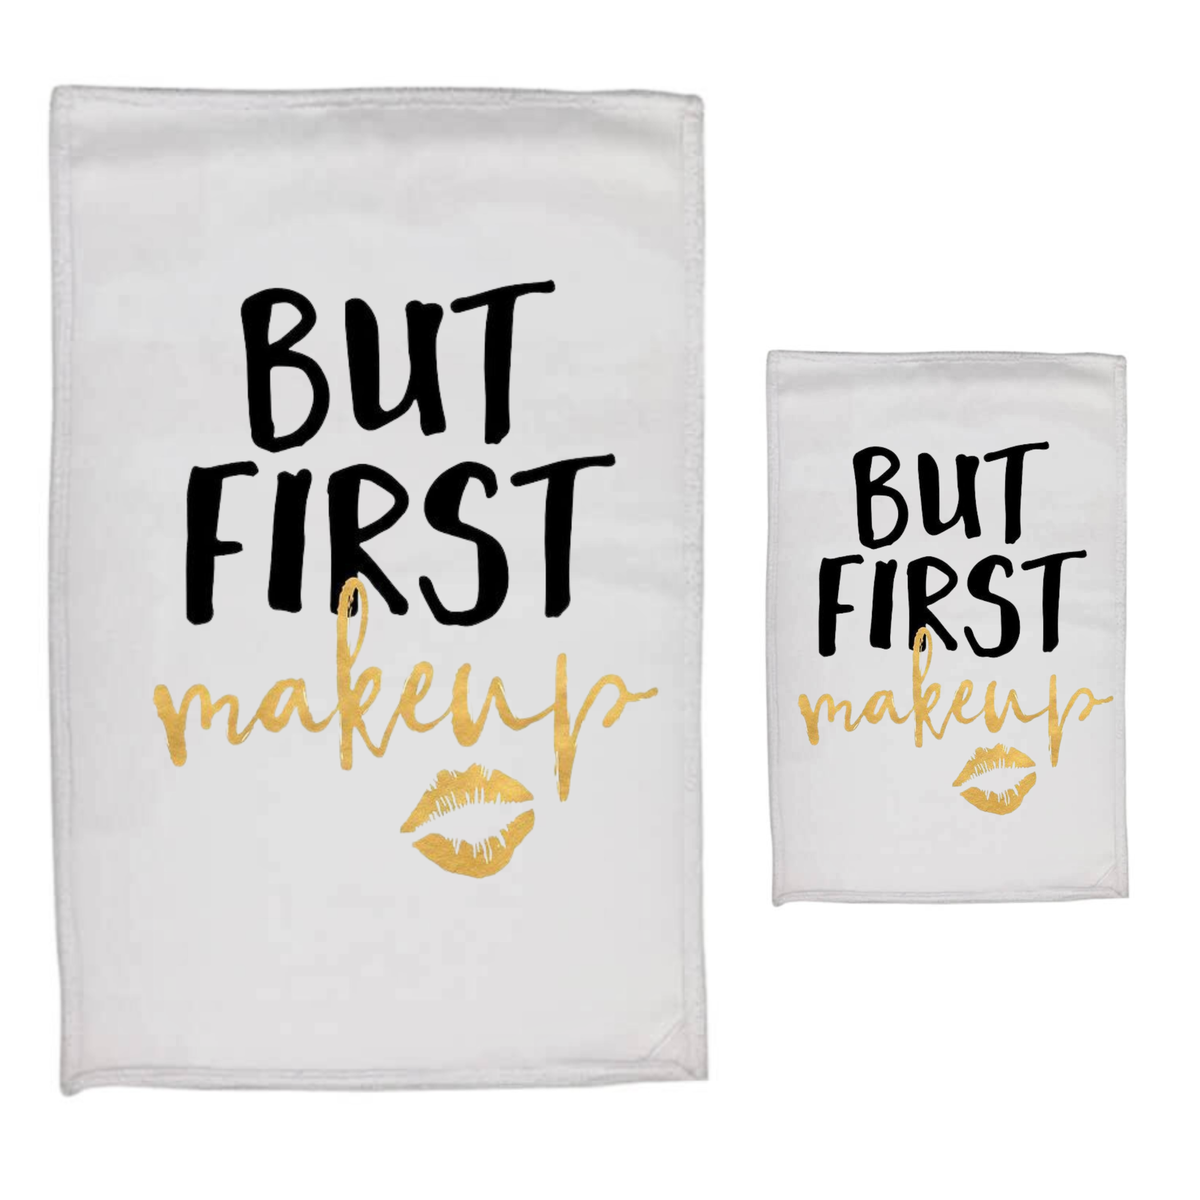 But first makeup - White Polyester Hand & Face Towel